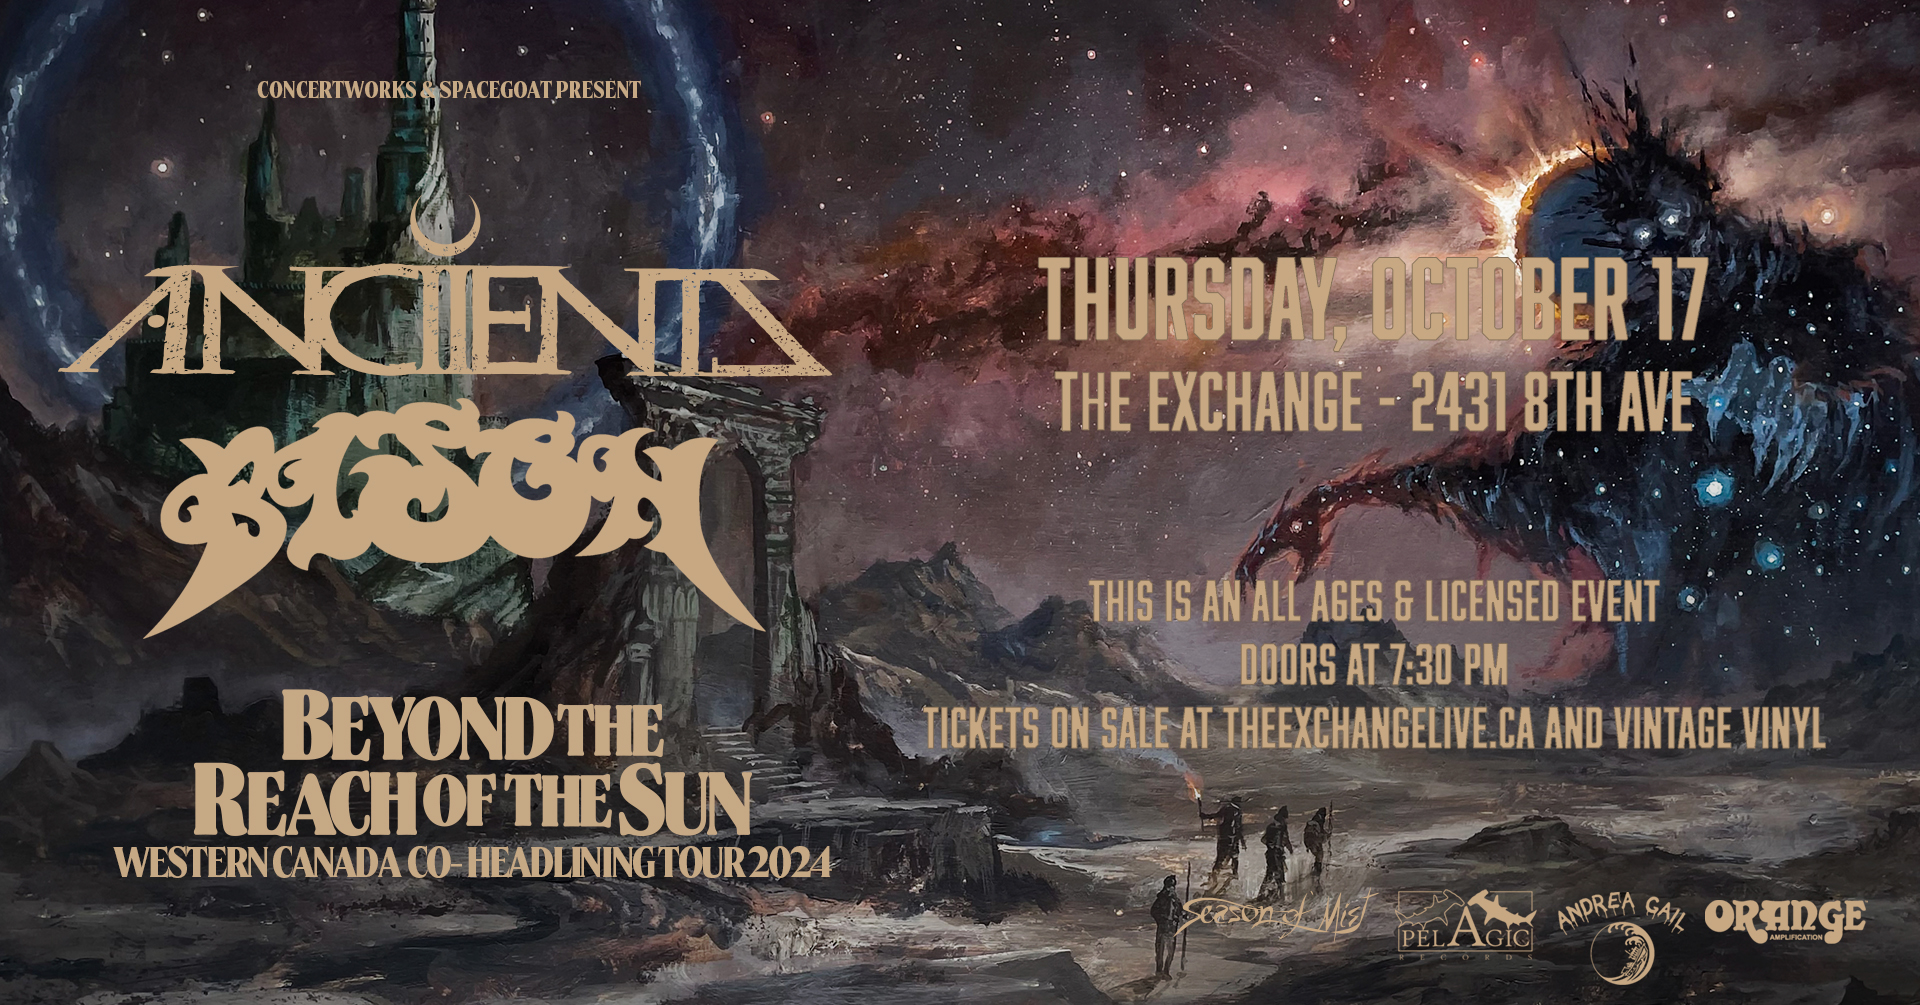 Anciients, Bison - Beyond The Reach of the Sun Western Canada Co-Headlining Tour 2024 